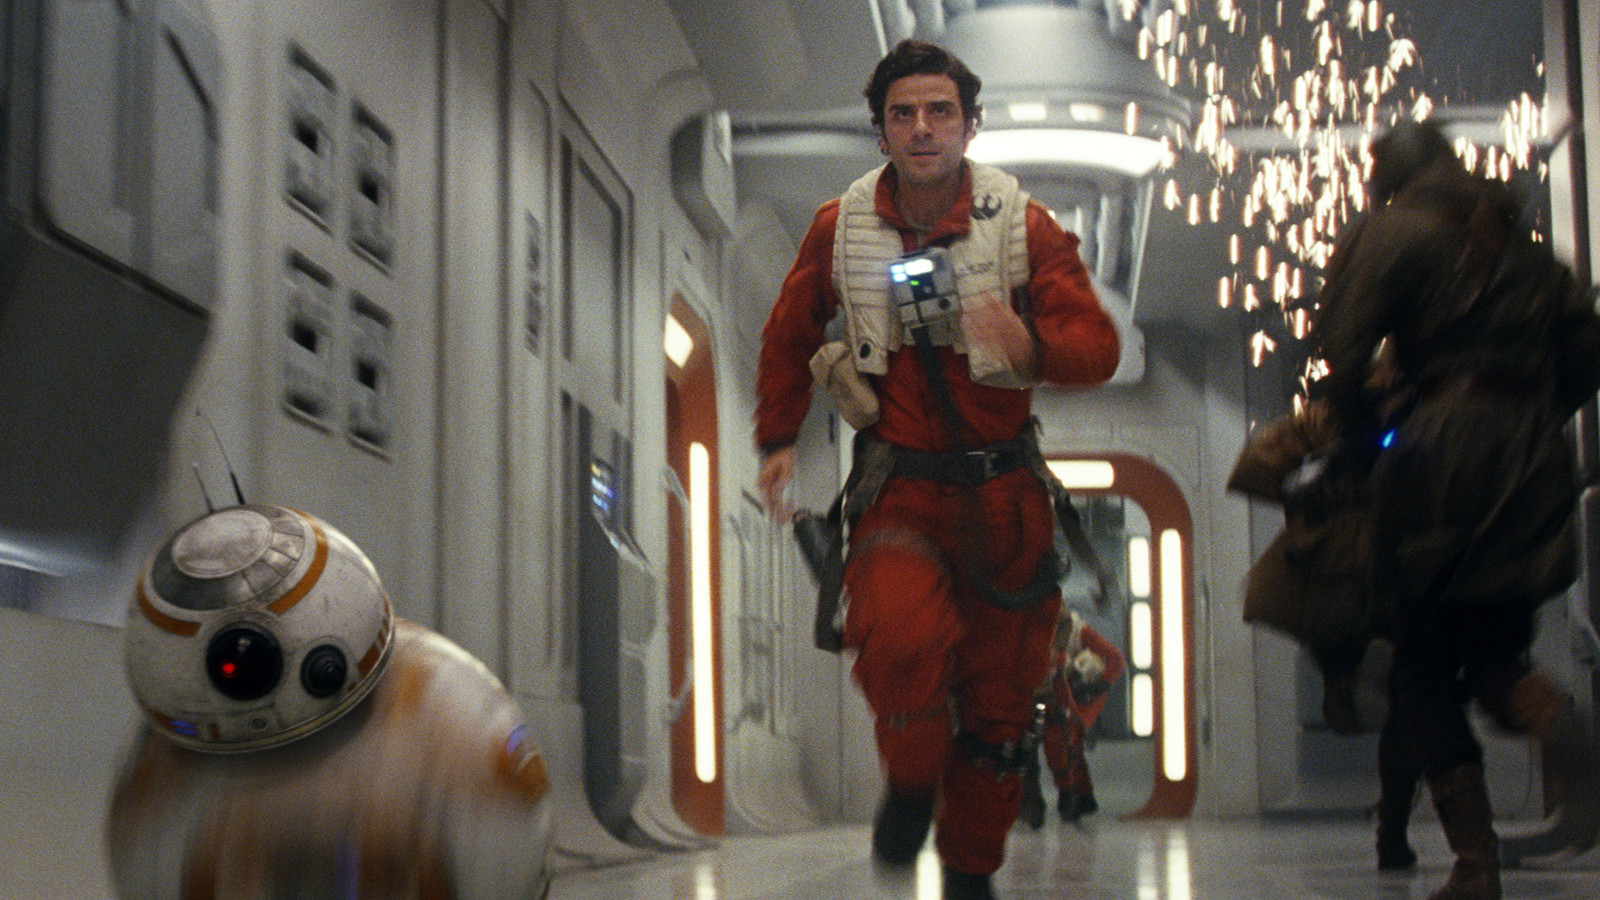 Oscar Isaac as Poe Dameron in action with BB-8 in Star Wars The Last Jedi. Image via The LA Times | onetakekate.com